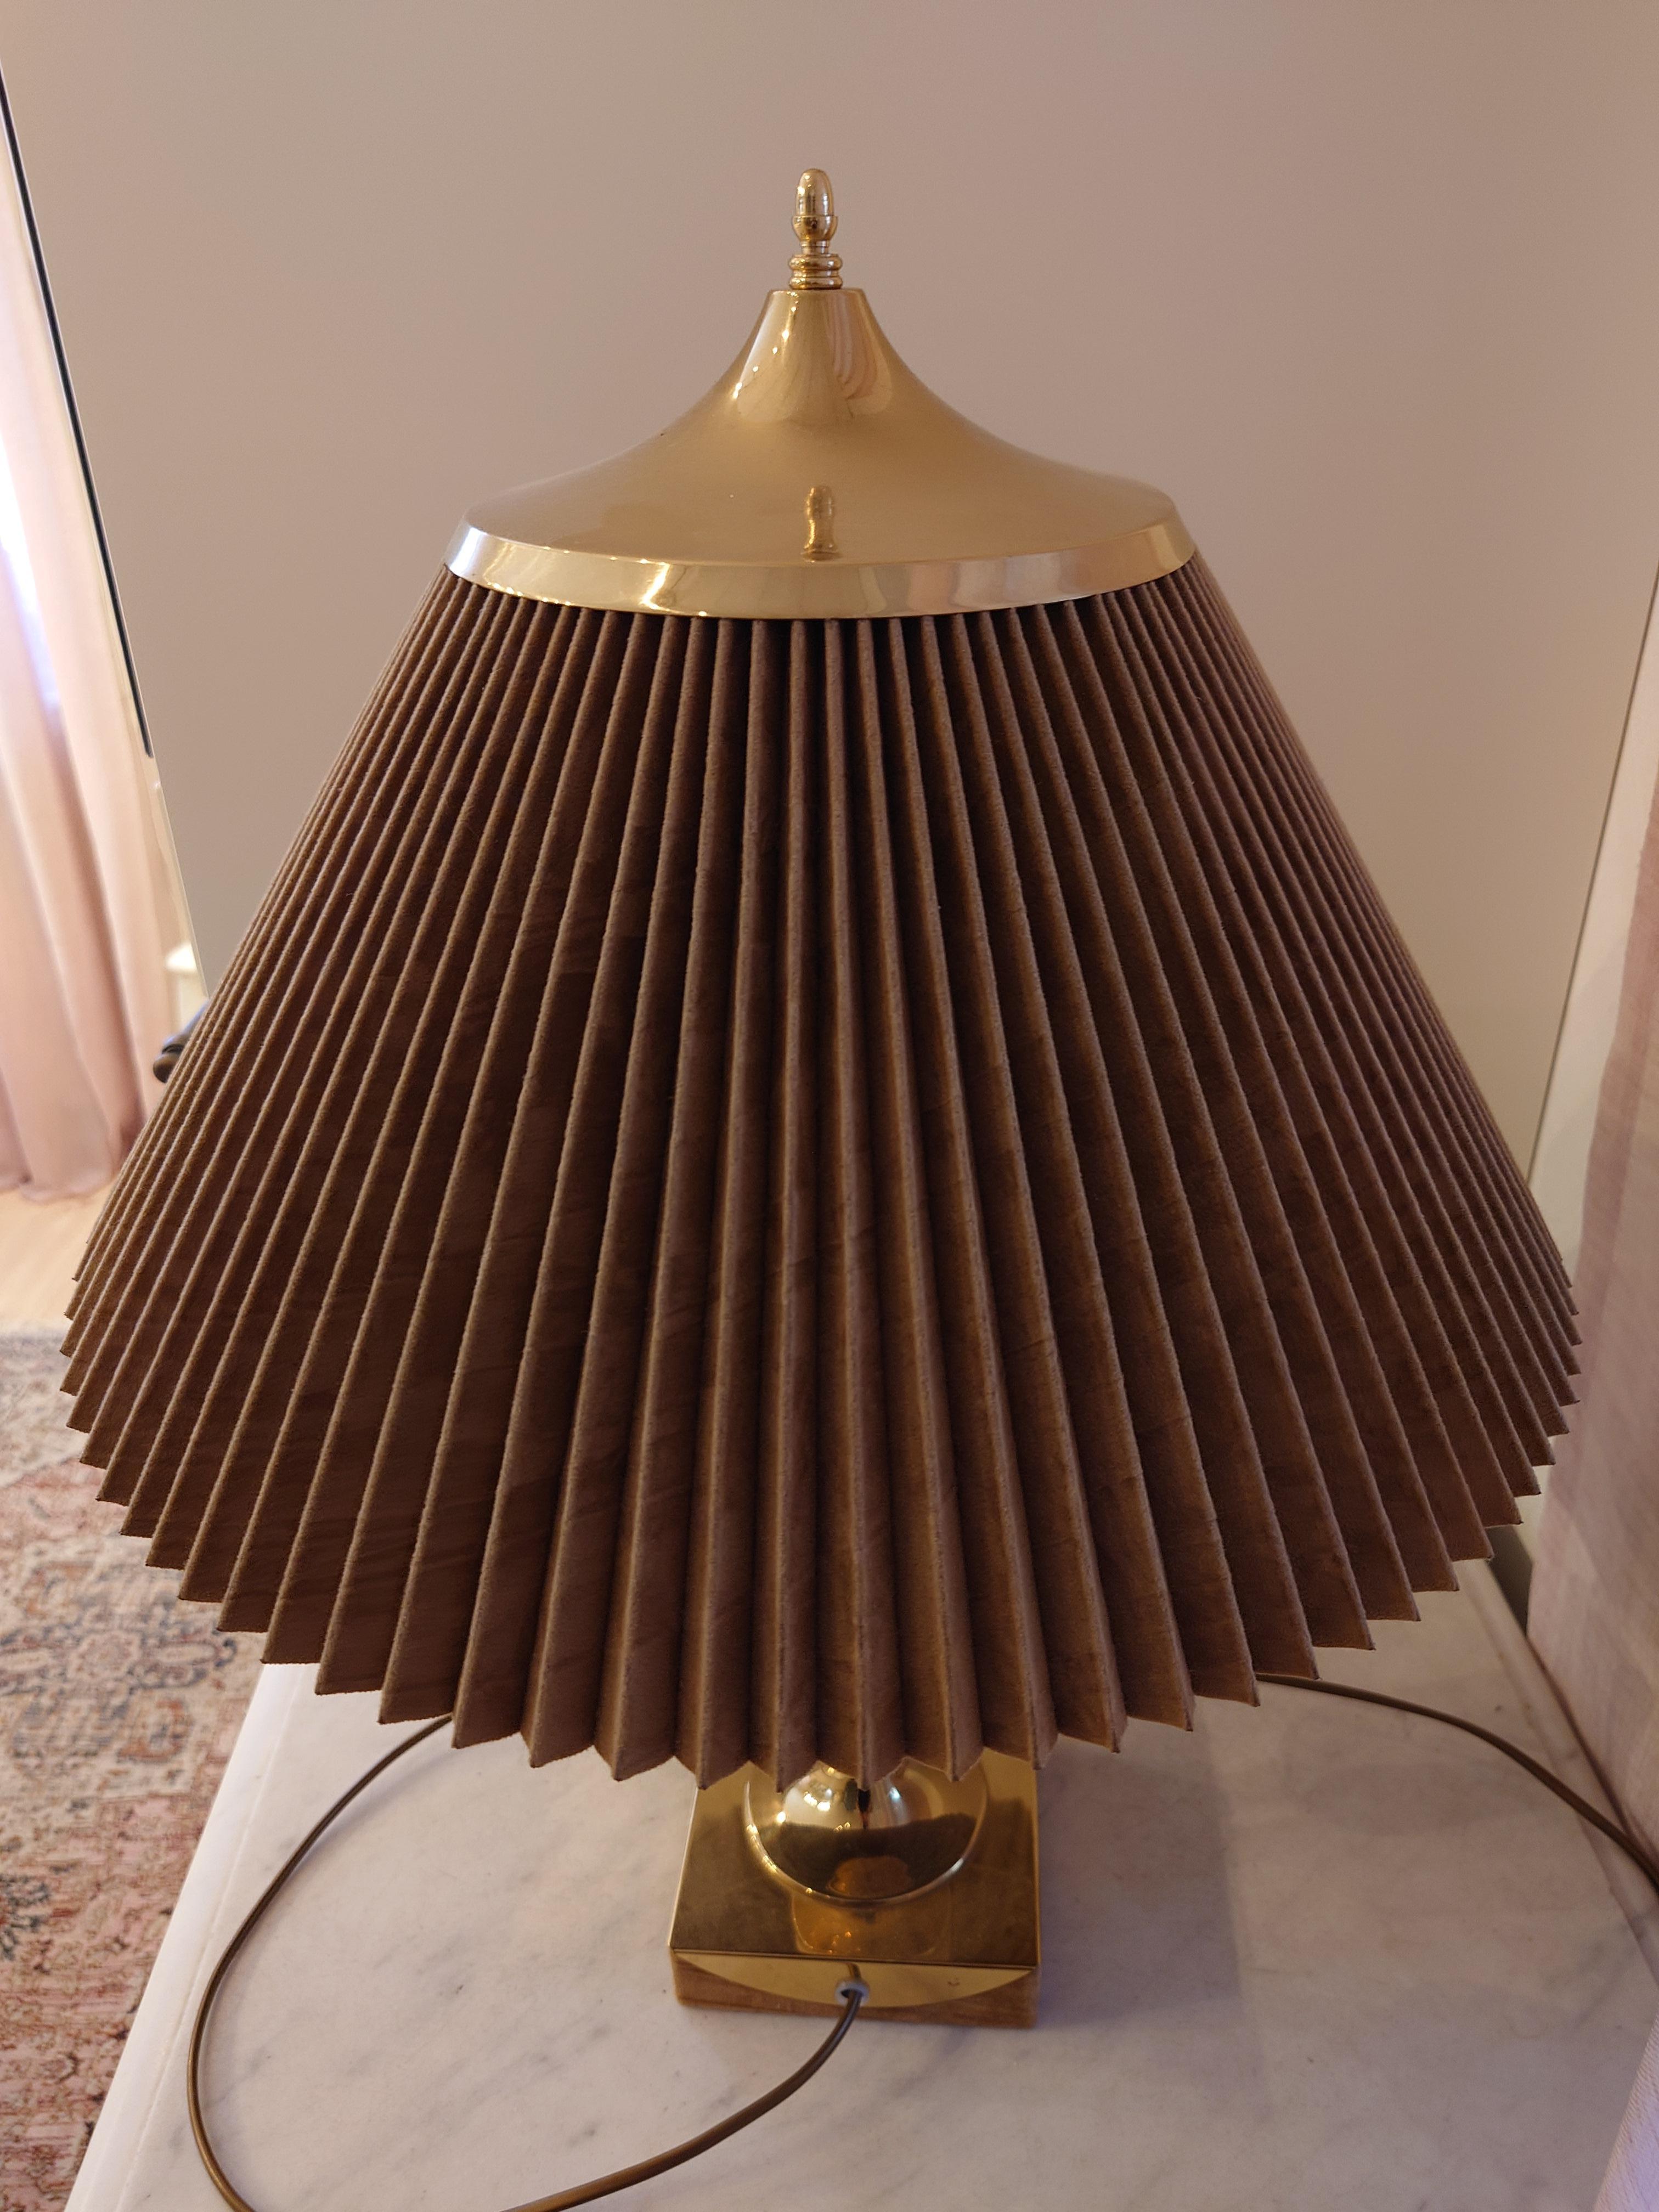  Tr & Co, Table Lamps, Brass, Norway, 1960s For Sale 5